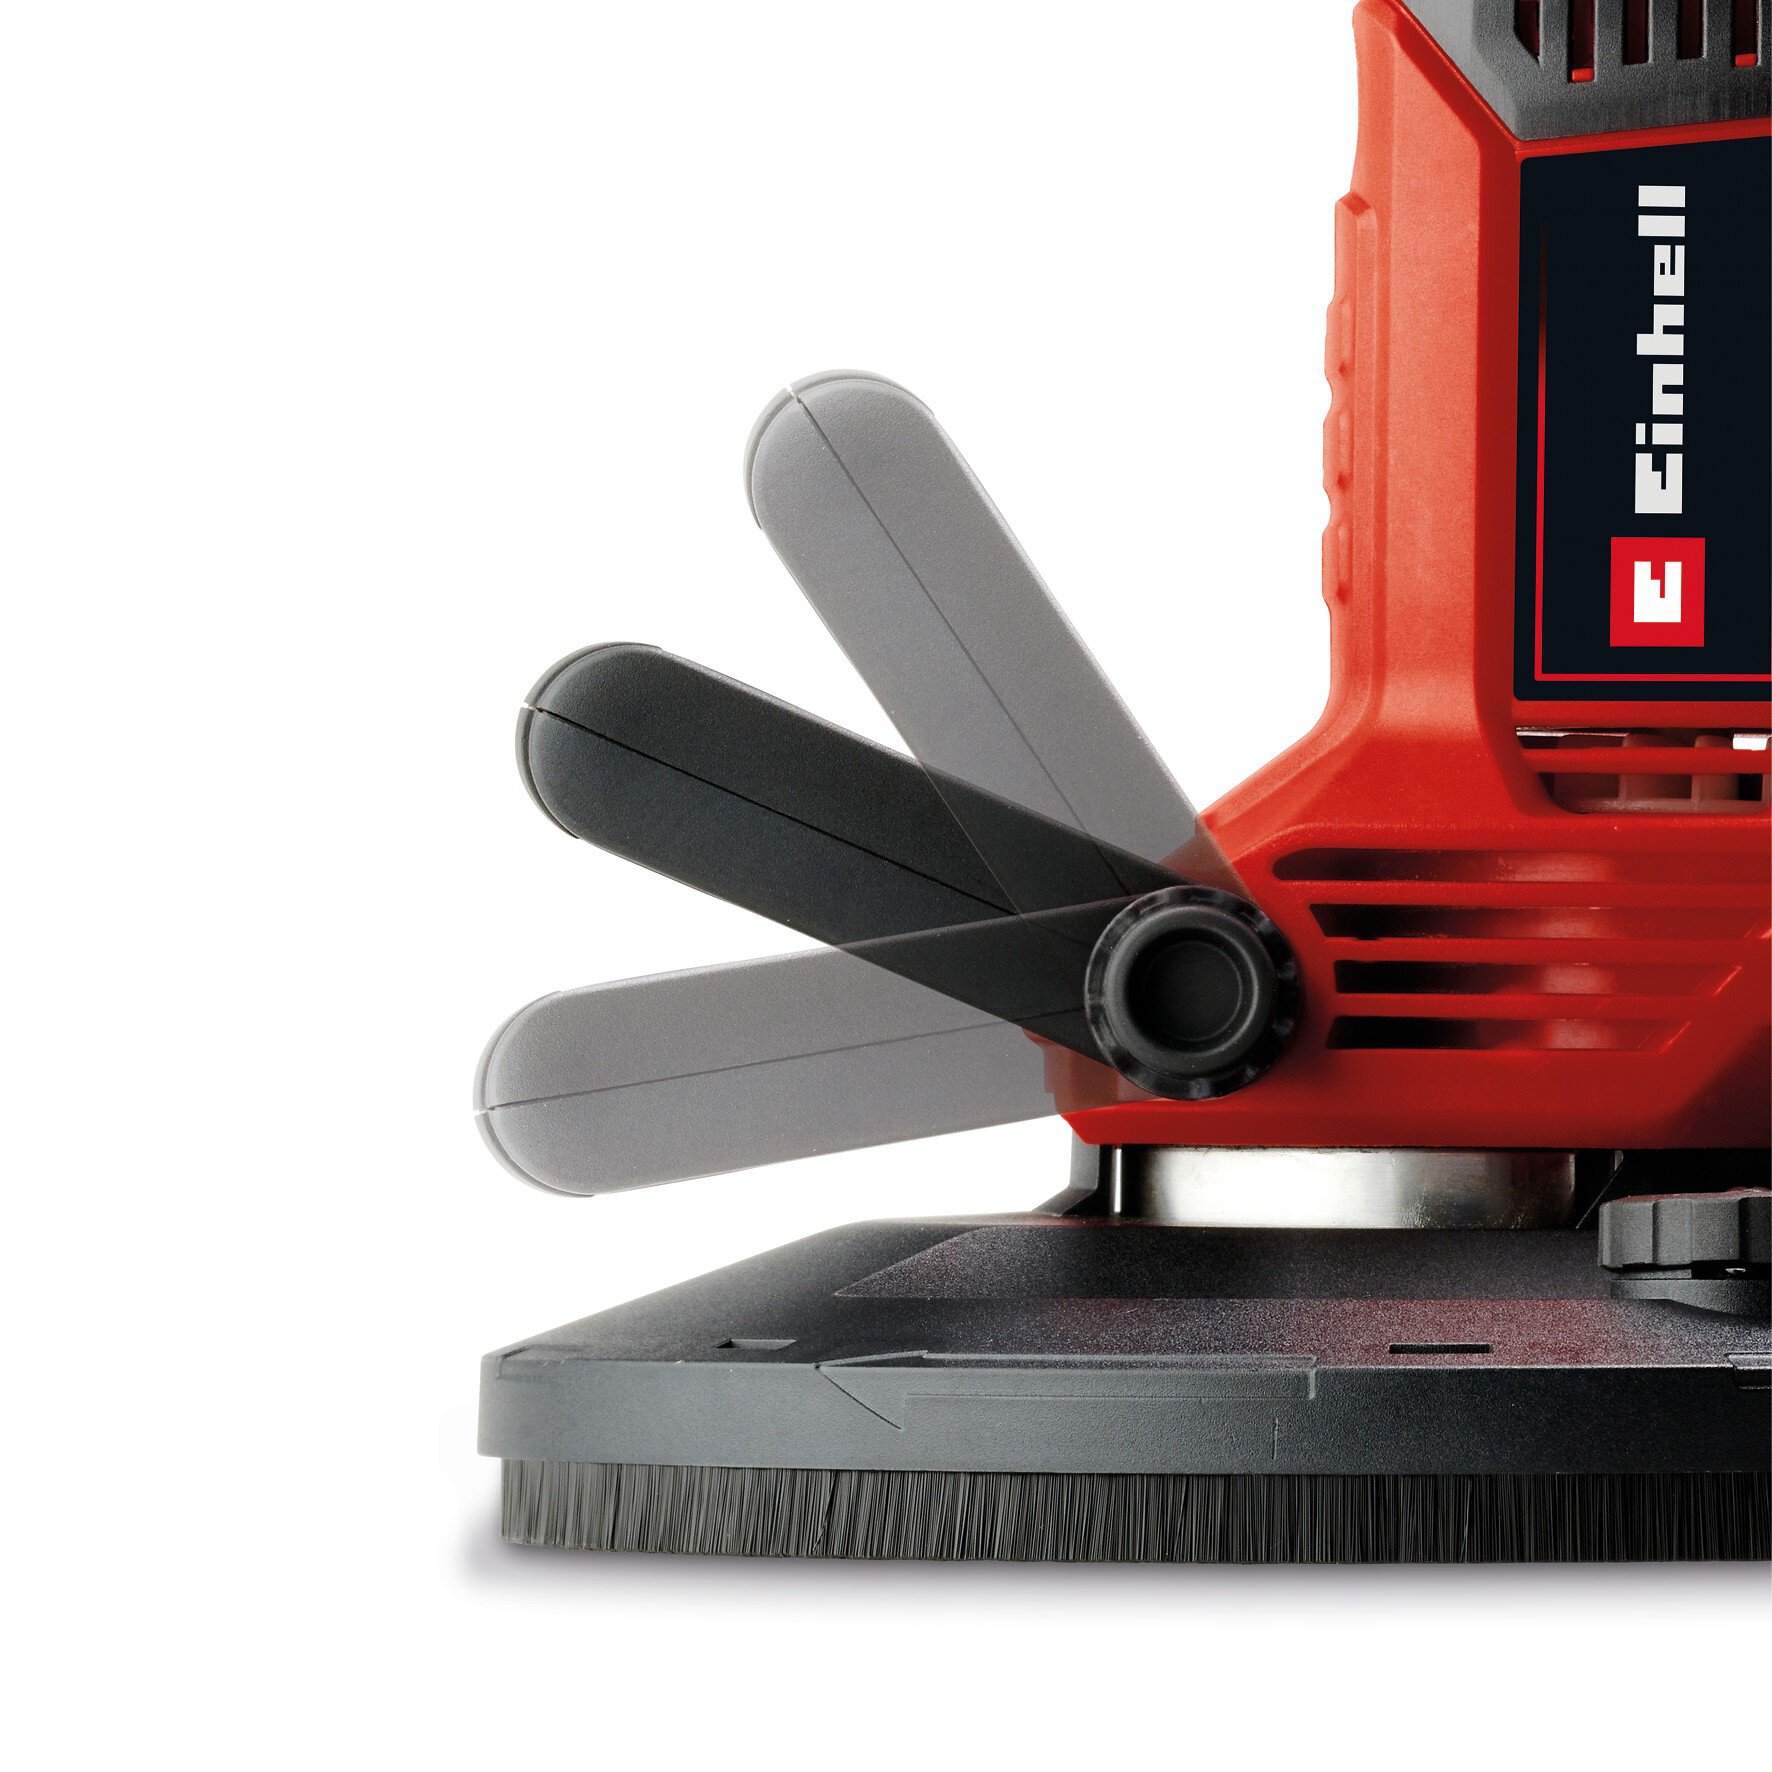 einhell-classic-drywall-polisher-4259945-detail_image-003